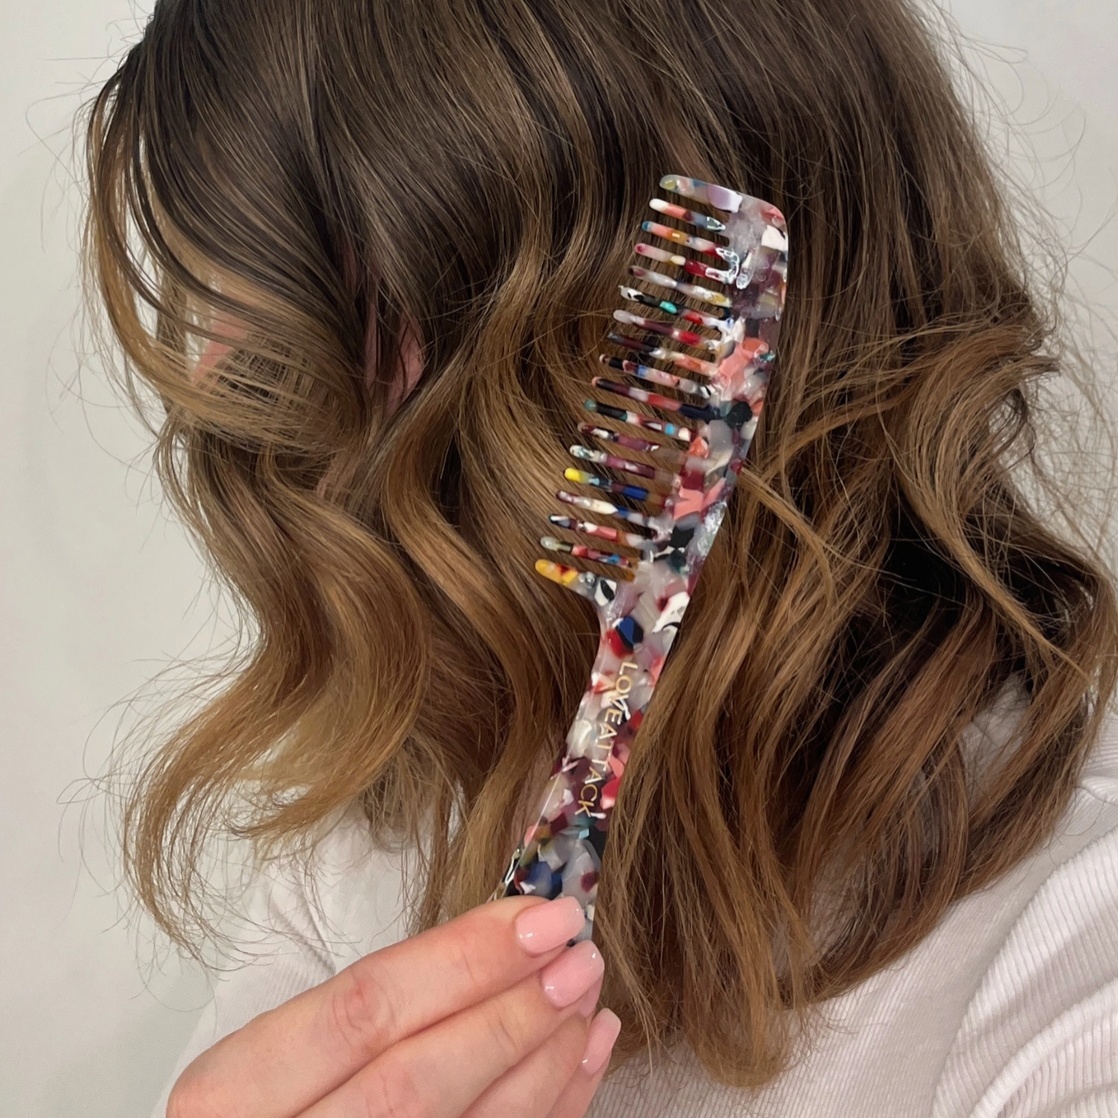 Colorful Combs